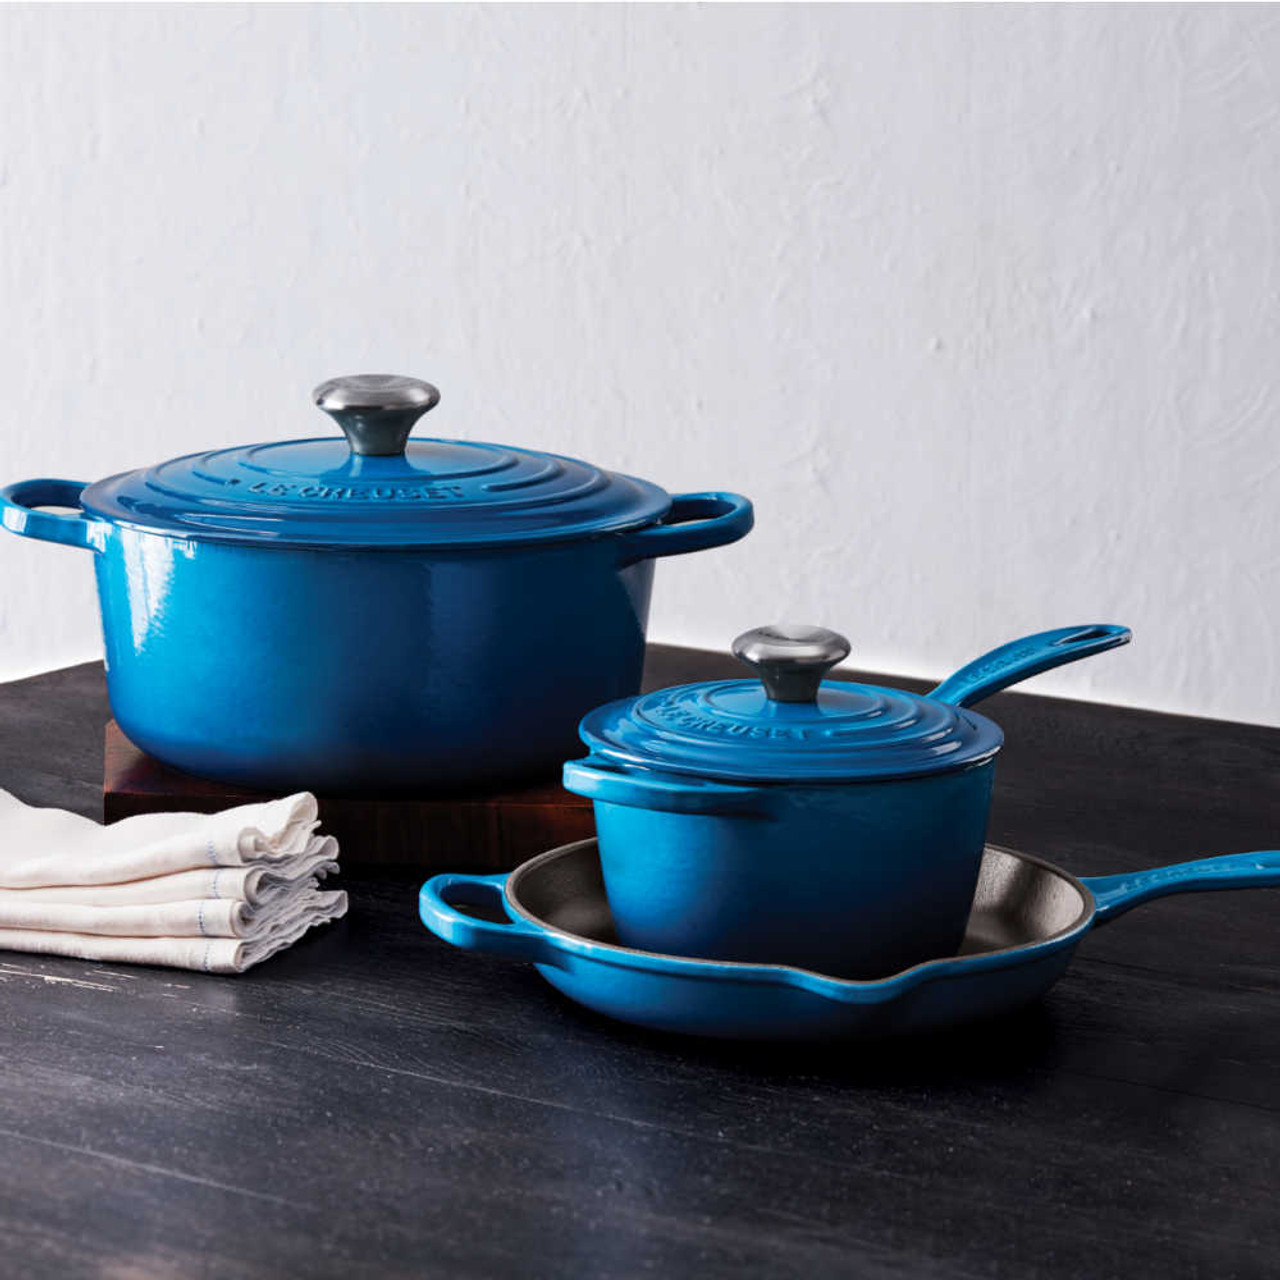 https://cdn11.bigcommerce.com/s-hccytny0od/images/stencil/1280x1280/products/4124/15358/le-creuset-5pc-set-marseille-2__48835.1625670207.jpg?c=2?imbypass=on